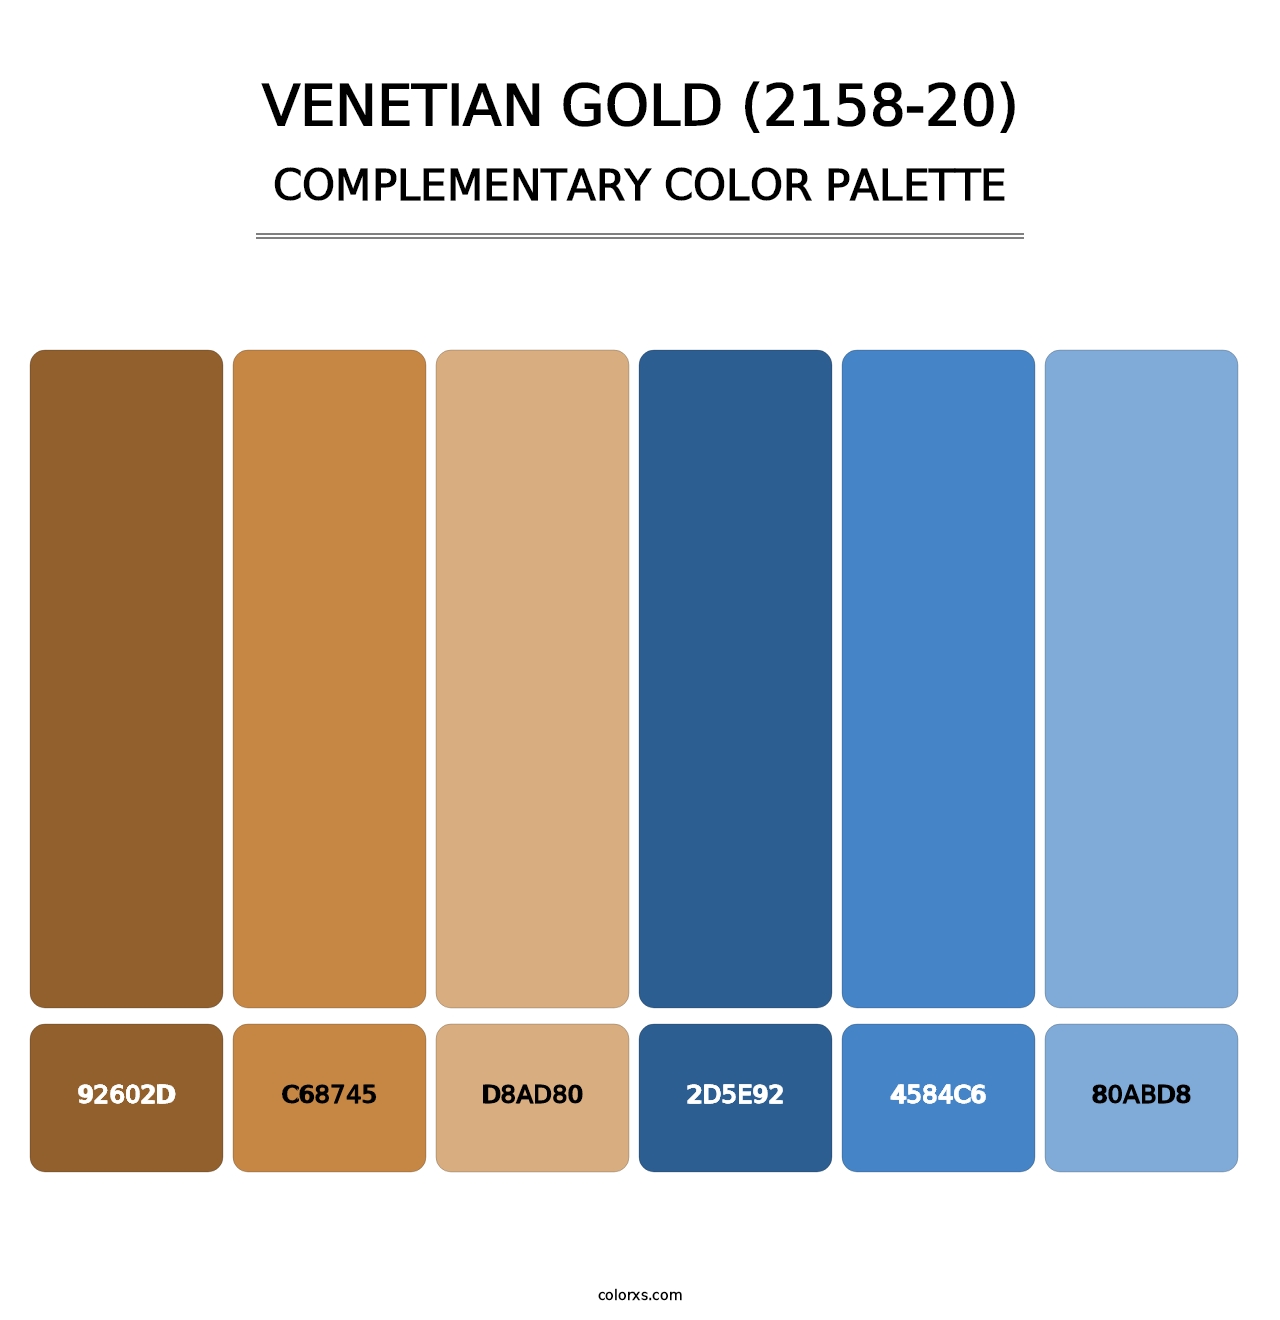 Venetian Gold (2158-20) - Complementary Color Palette